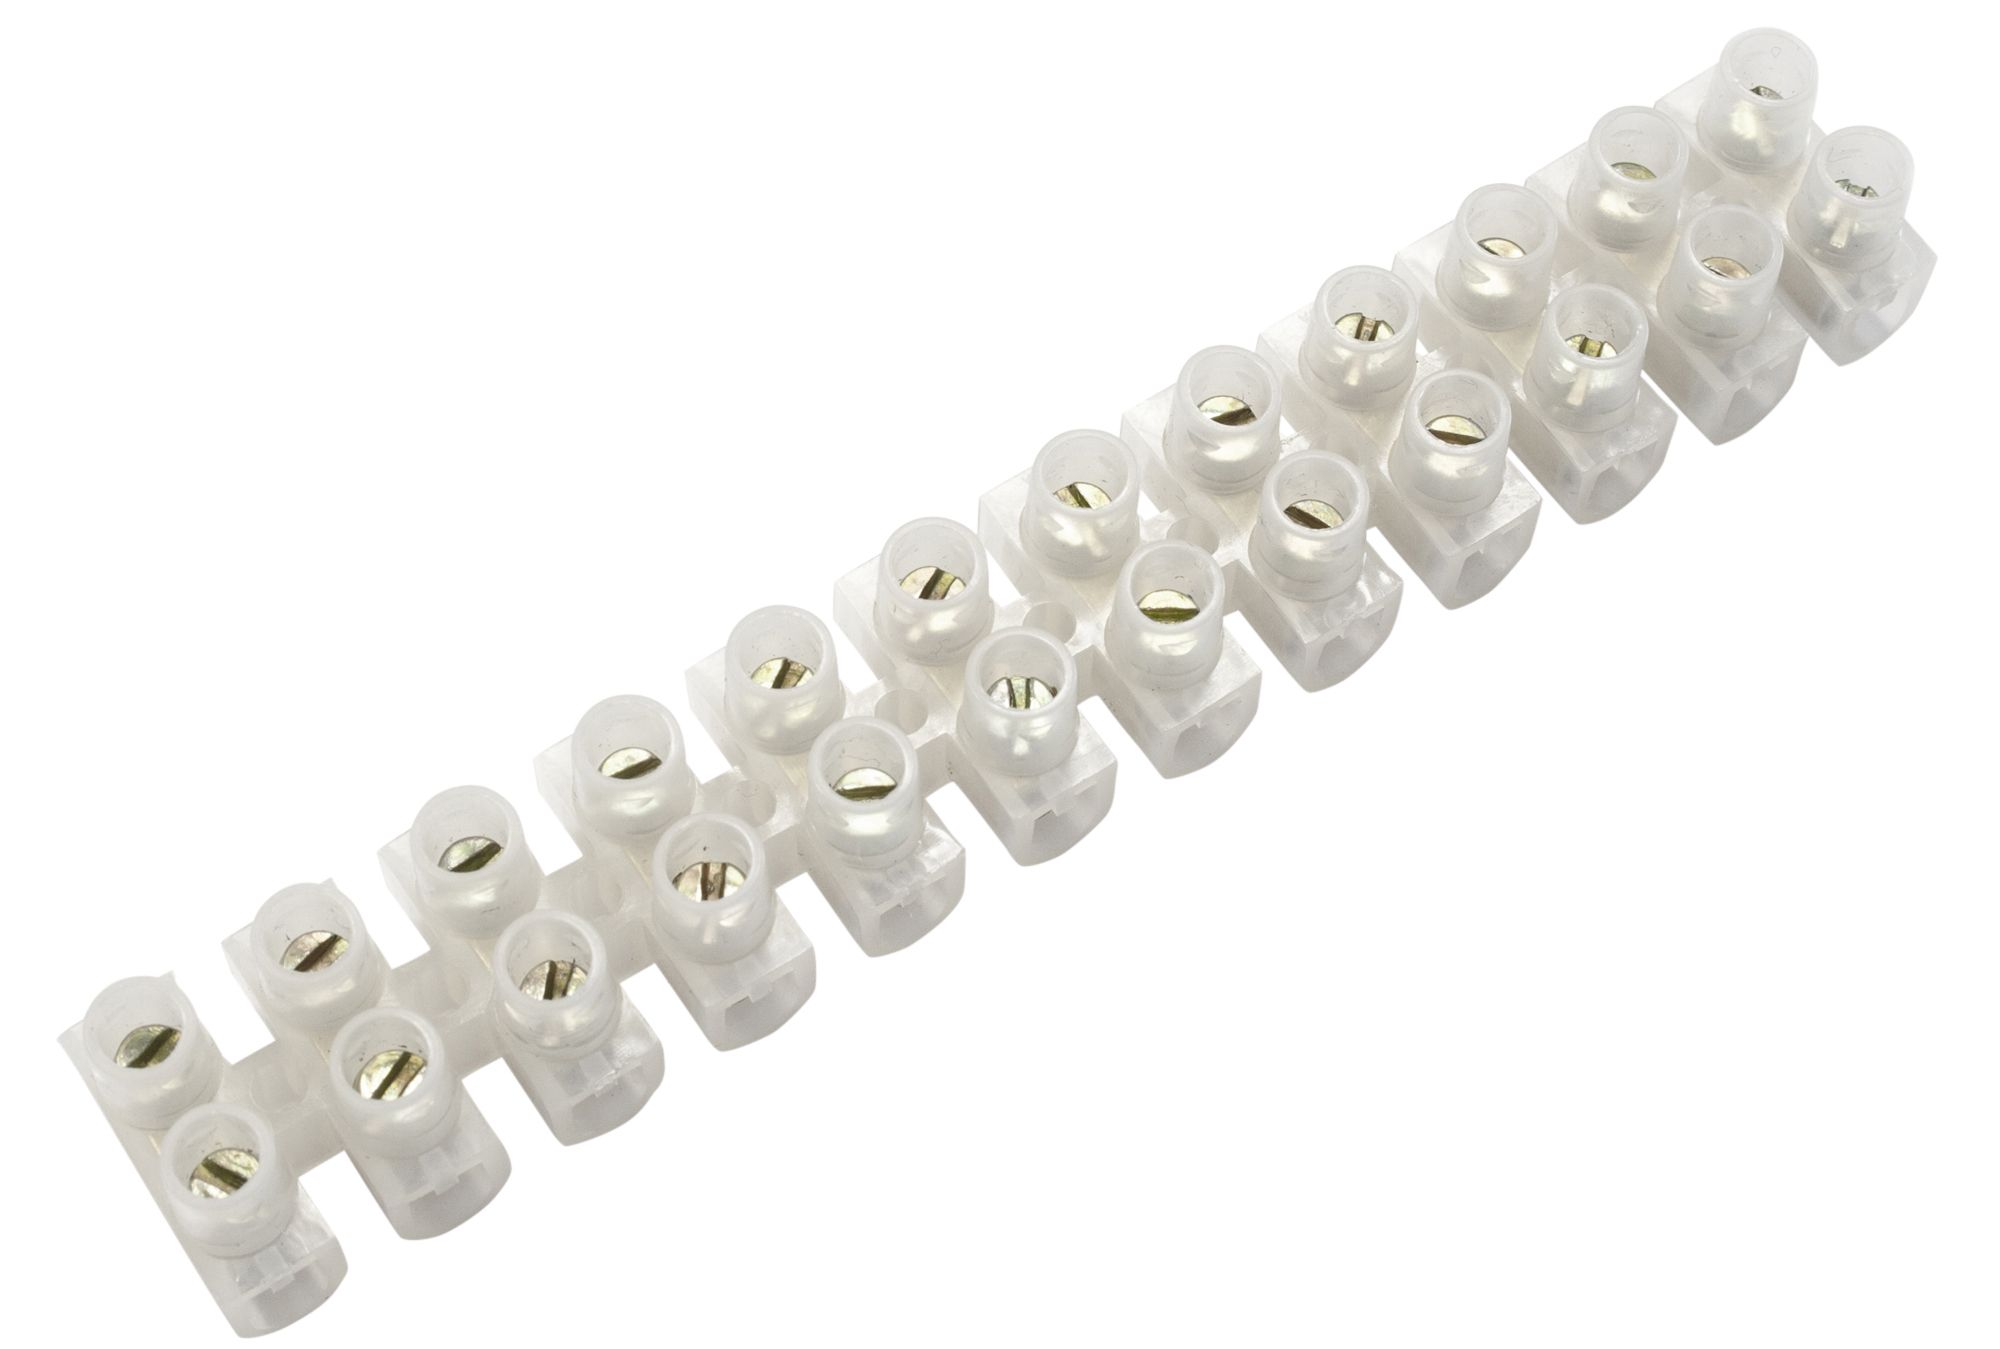 B&Q White 3A 12 way Cable connector strip